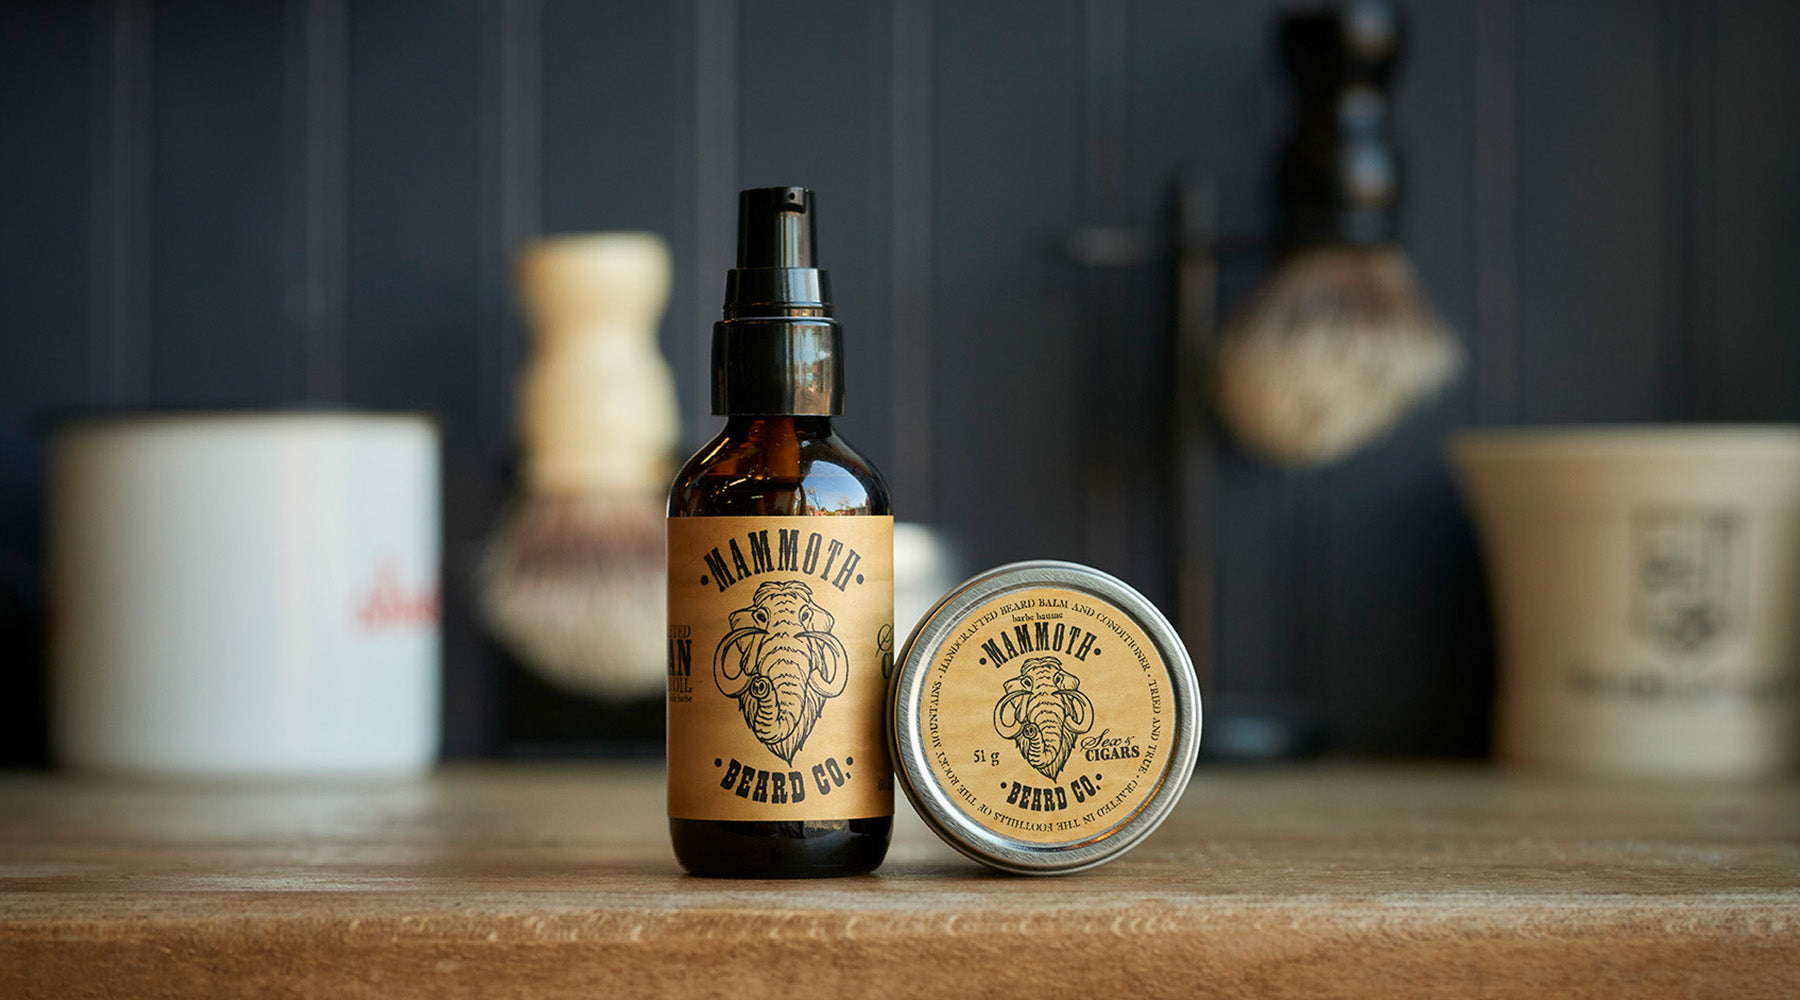 Beard Oils and Beard Balms - What’s the difference?